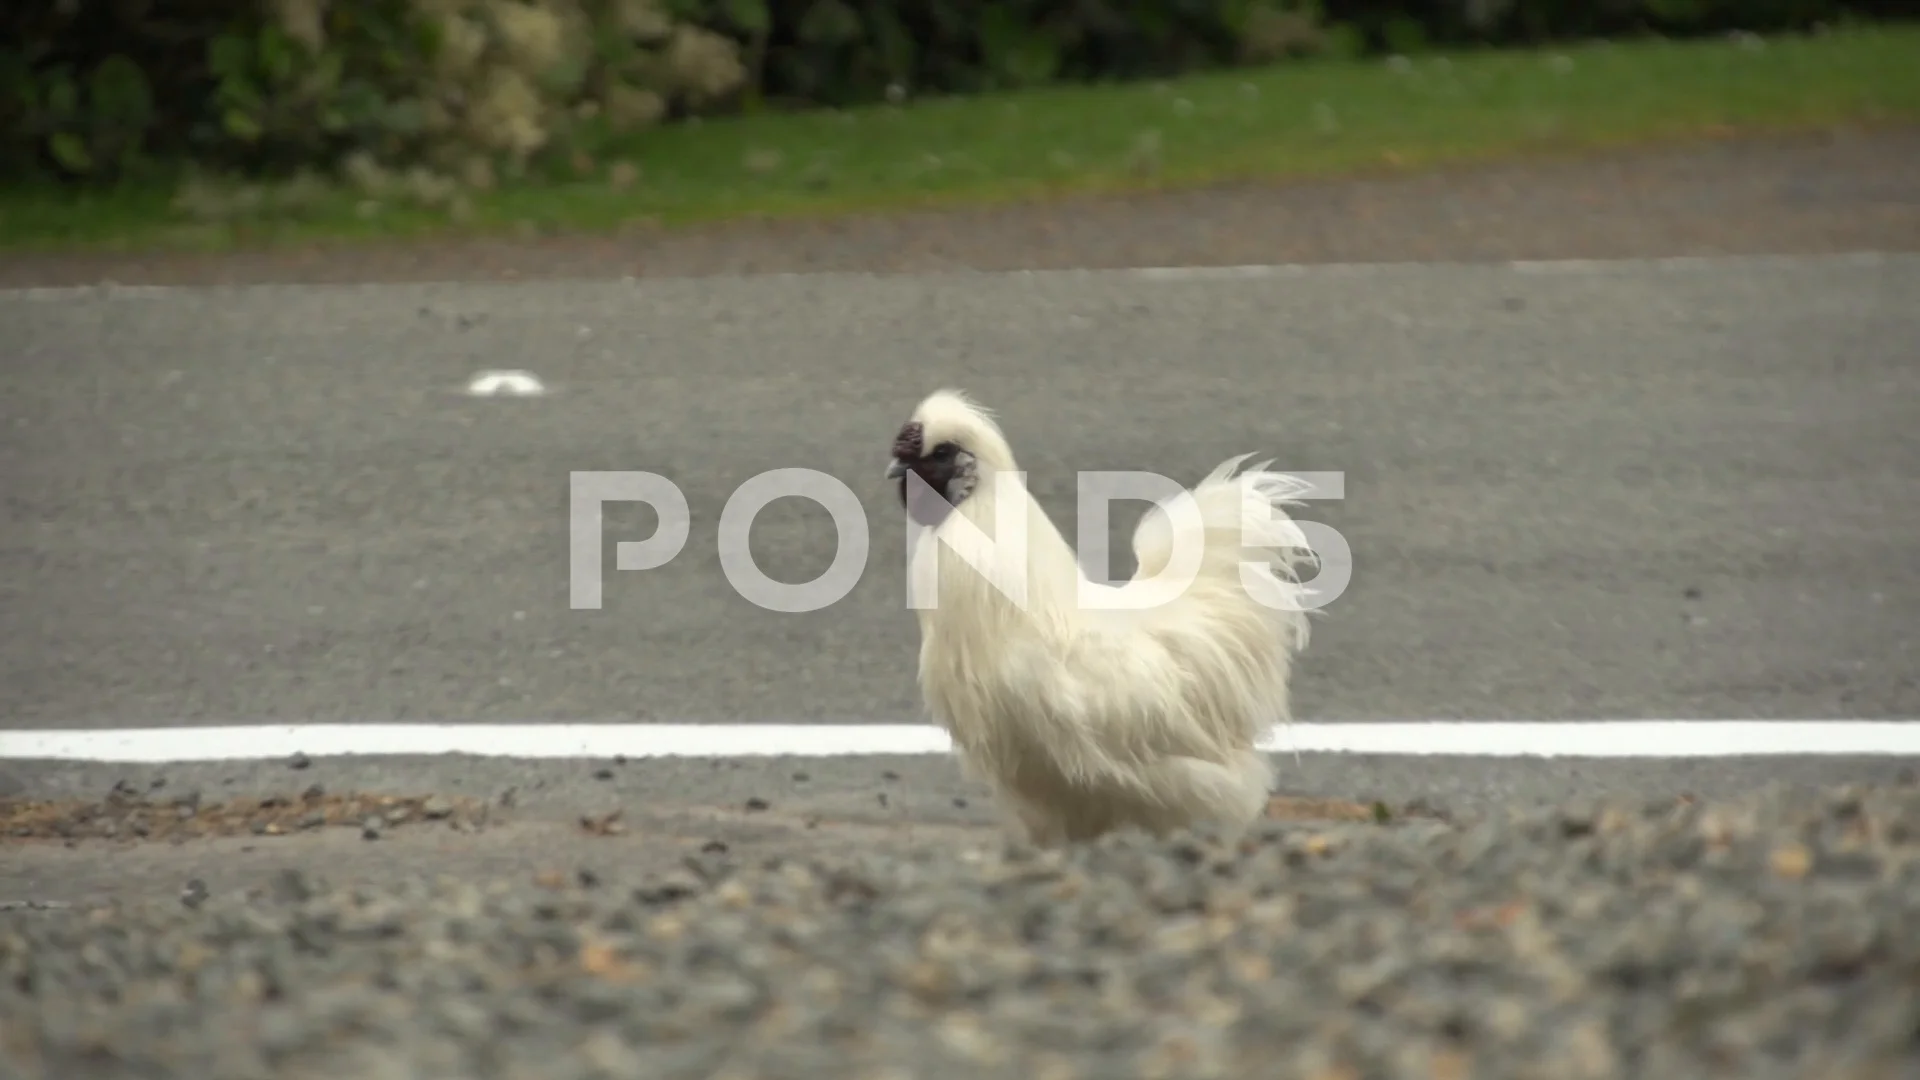 Funny chicken walking next to the road | Stock Video | Pond5